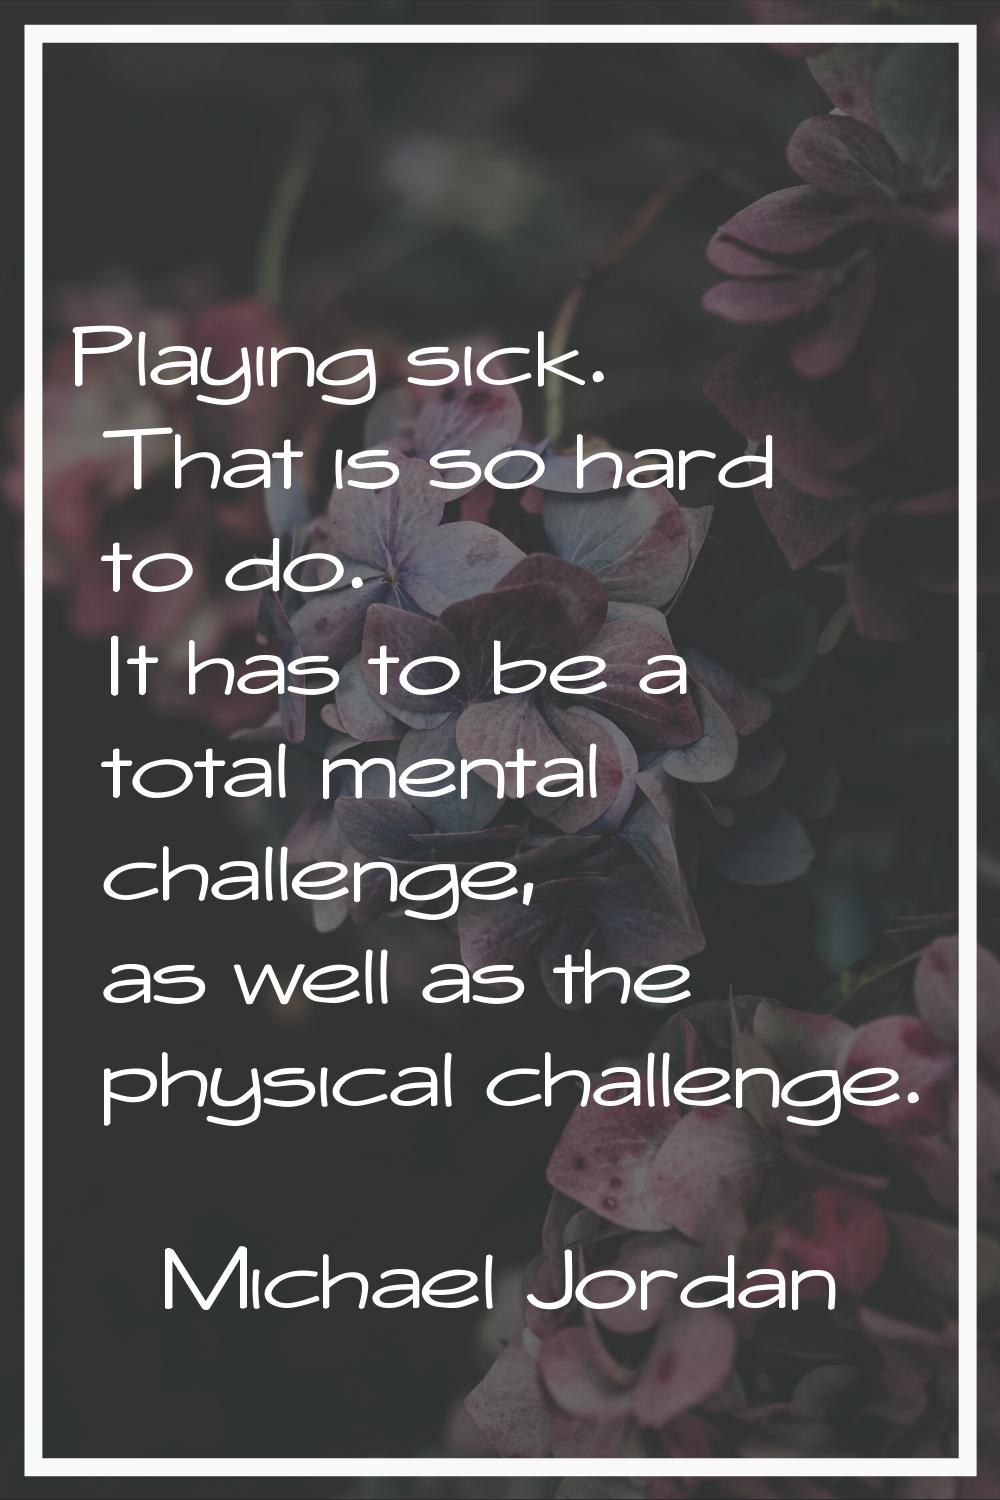 Playing sick. That is so hard to do. It has to be a total mental challenge, as well as the physical